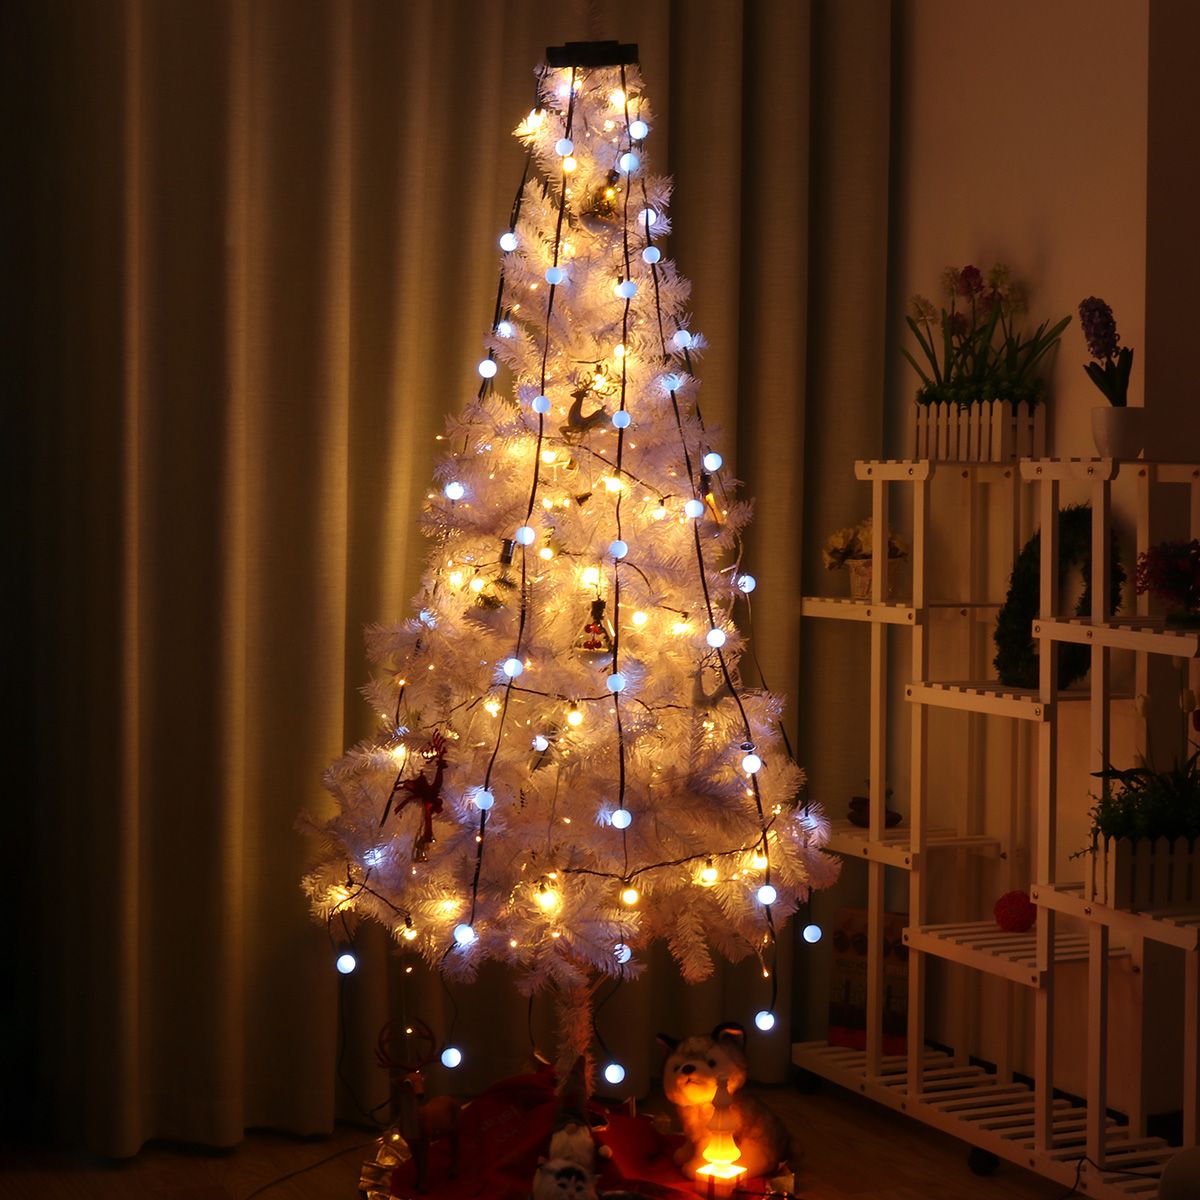 7Ft-Artificial-PVC-Christmas-Tree-With-Stand-Holiday-Season-Home-Outdoor-Decorations-White-1600490